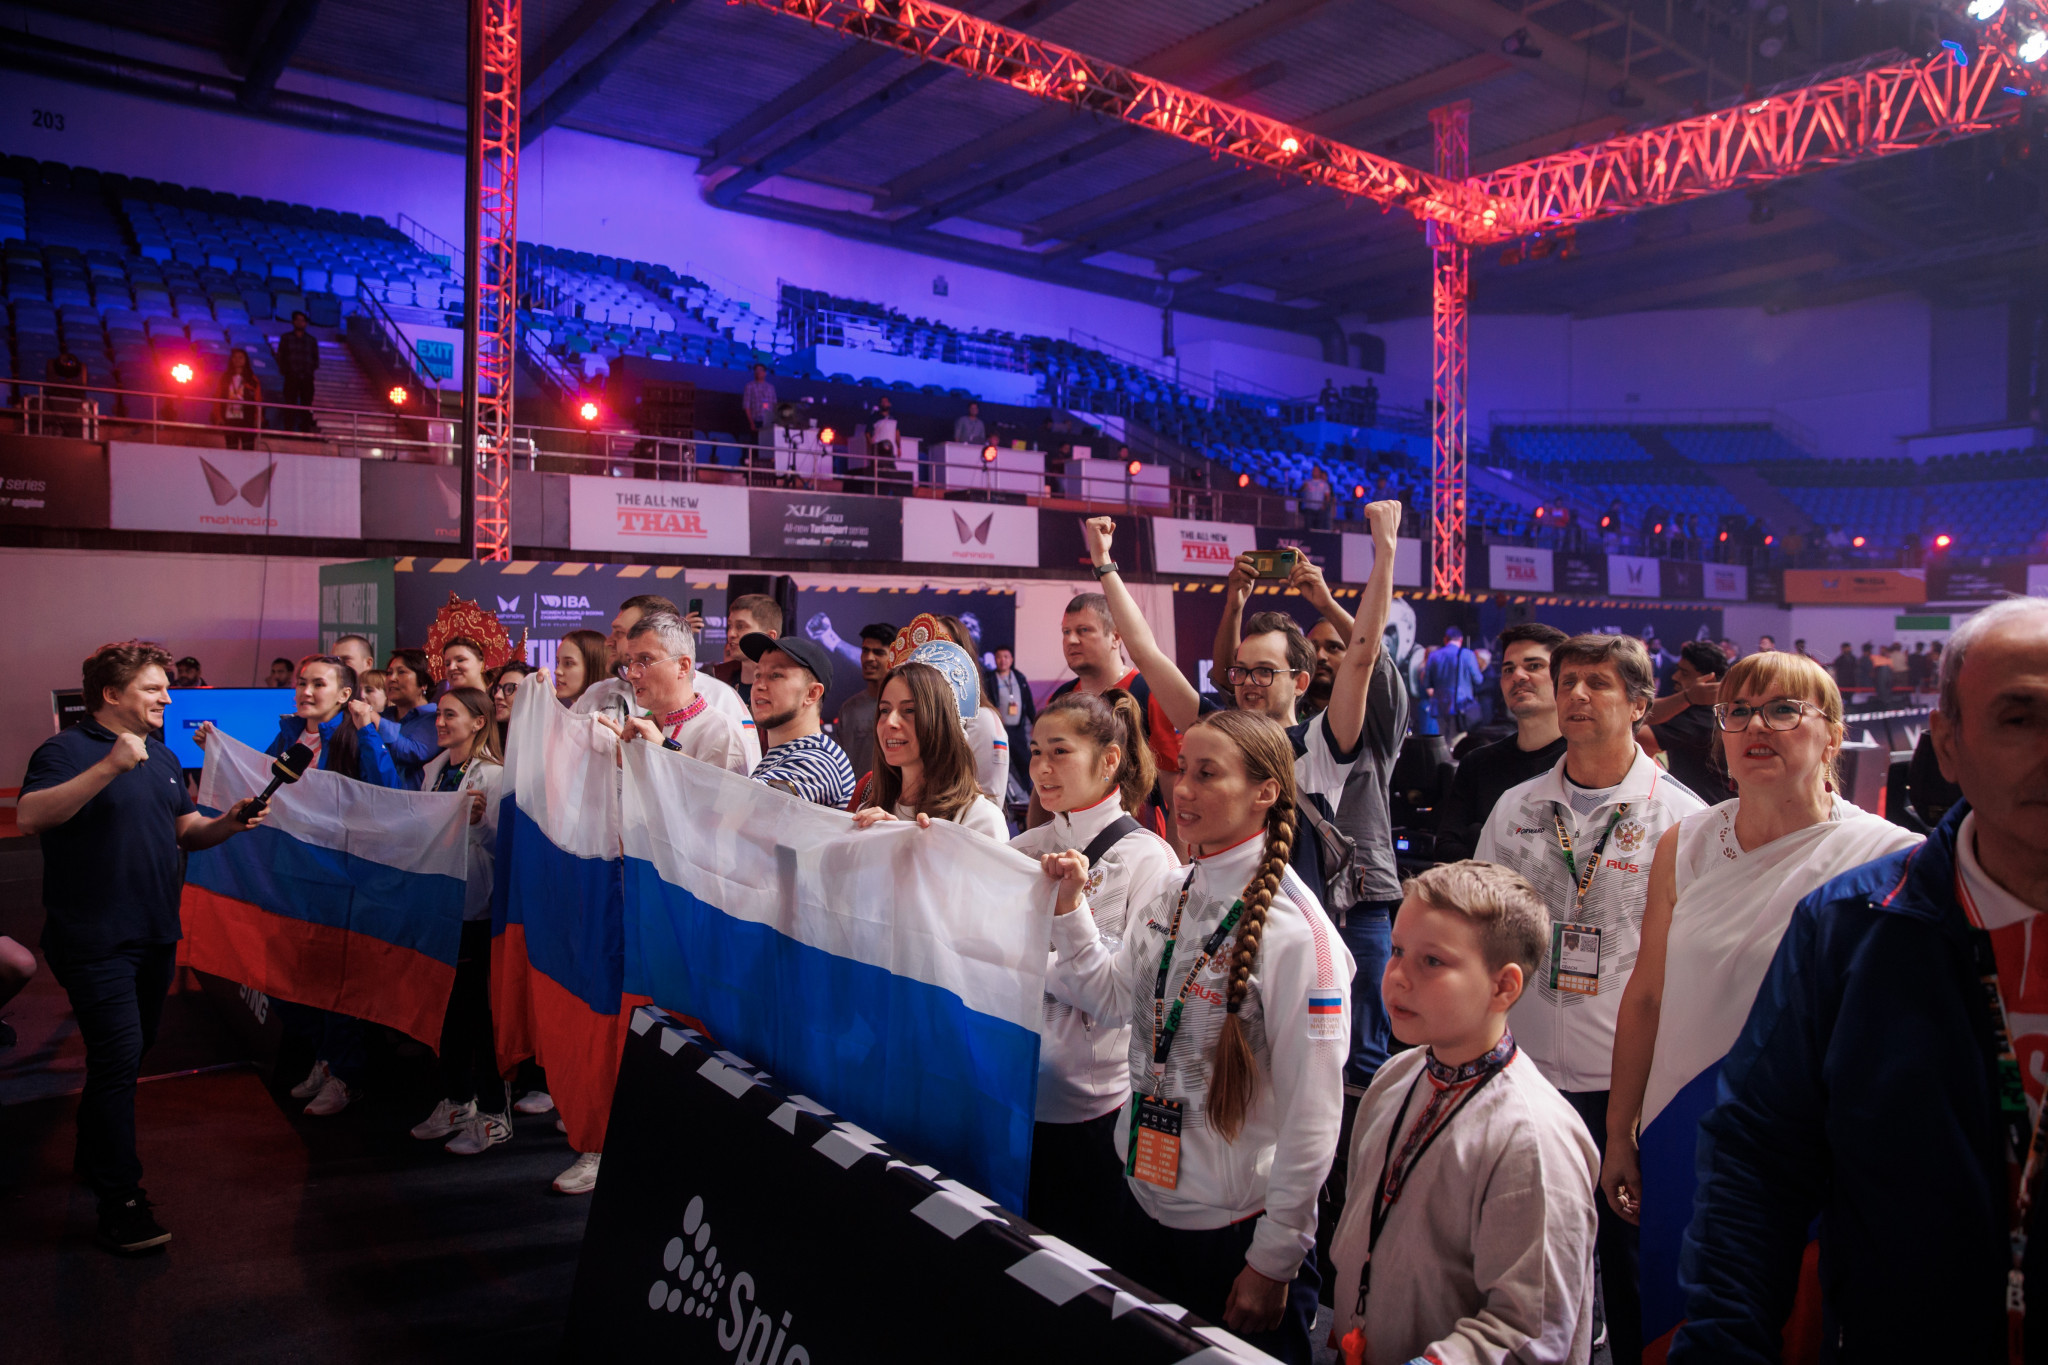 Russian fans gathered in front of the stage to hear the correct national anthem being played ©IBA